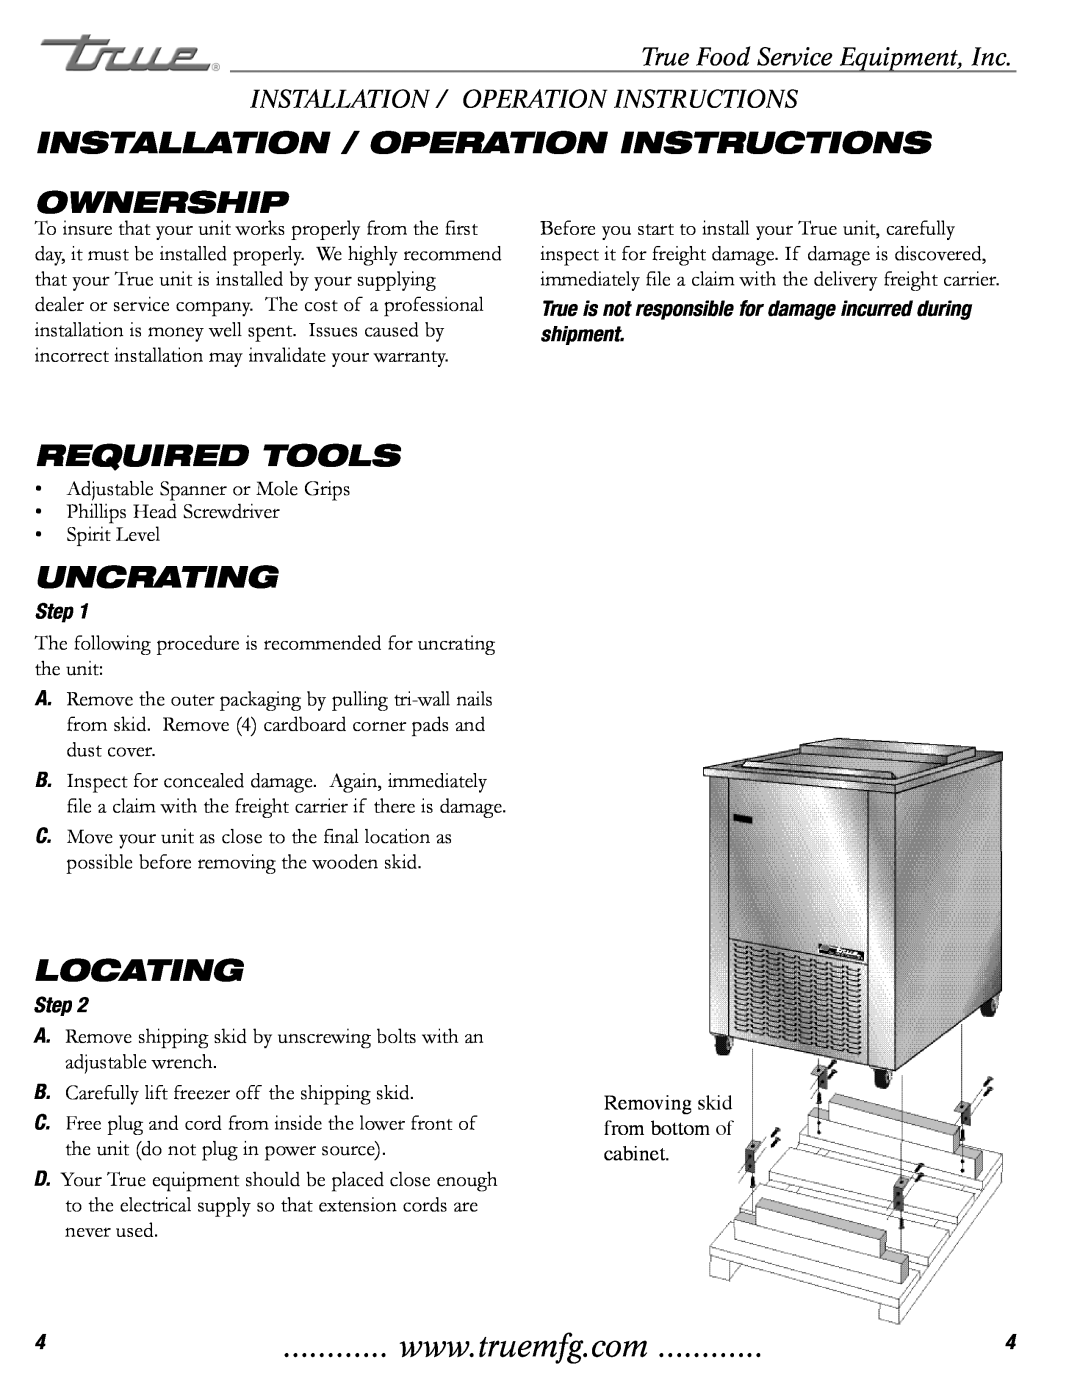 True Manufacturing Company TMW-36F Installation / Operation Instructions, Ownership, Required Tools, Uncrating, Locating 